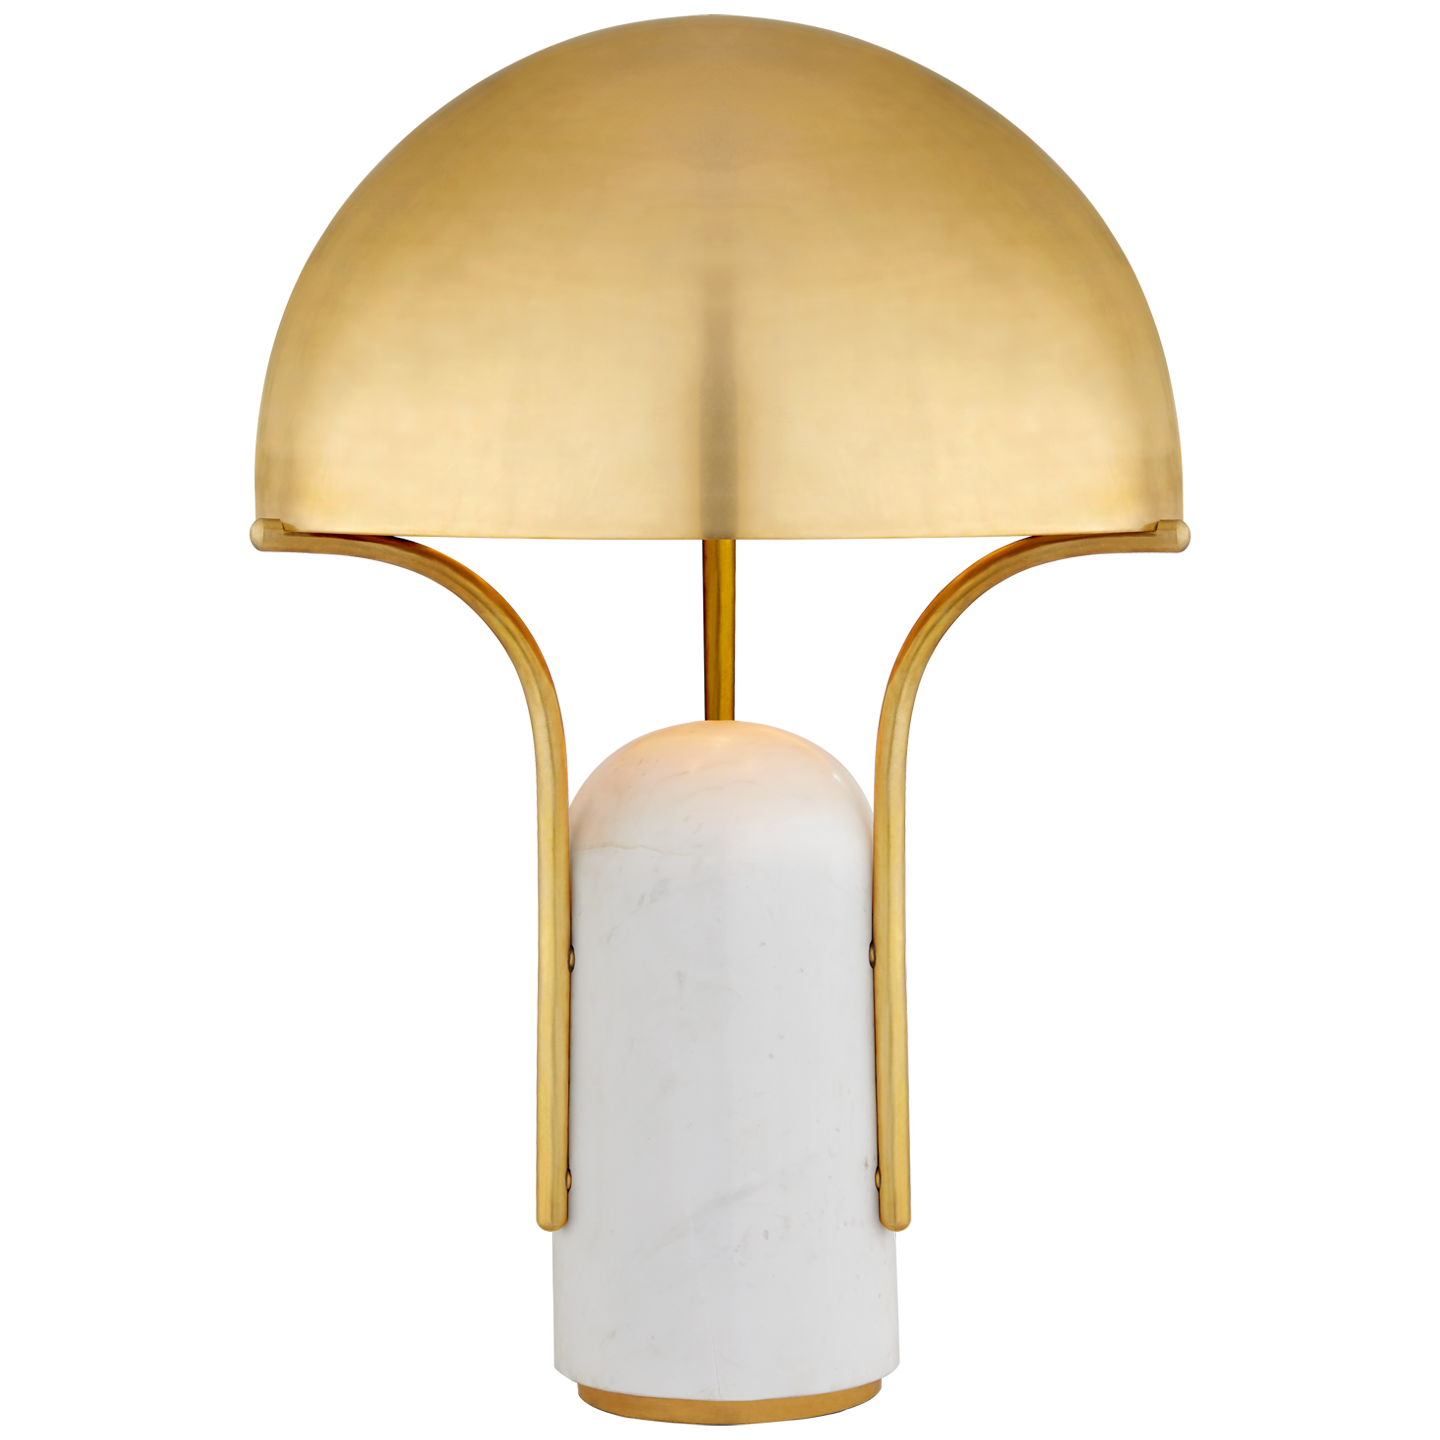 Affinity Lamp White Marble Brass 